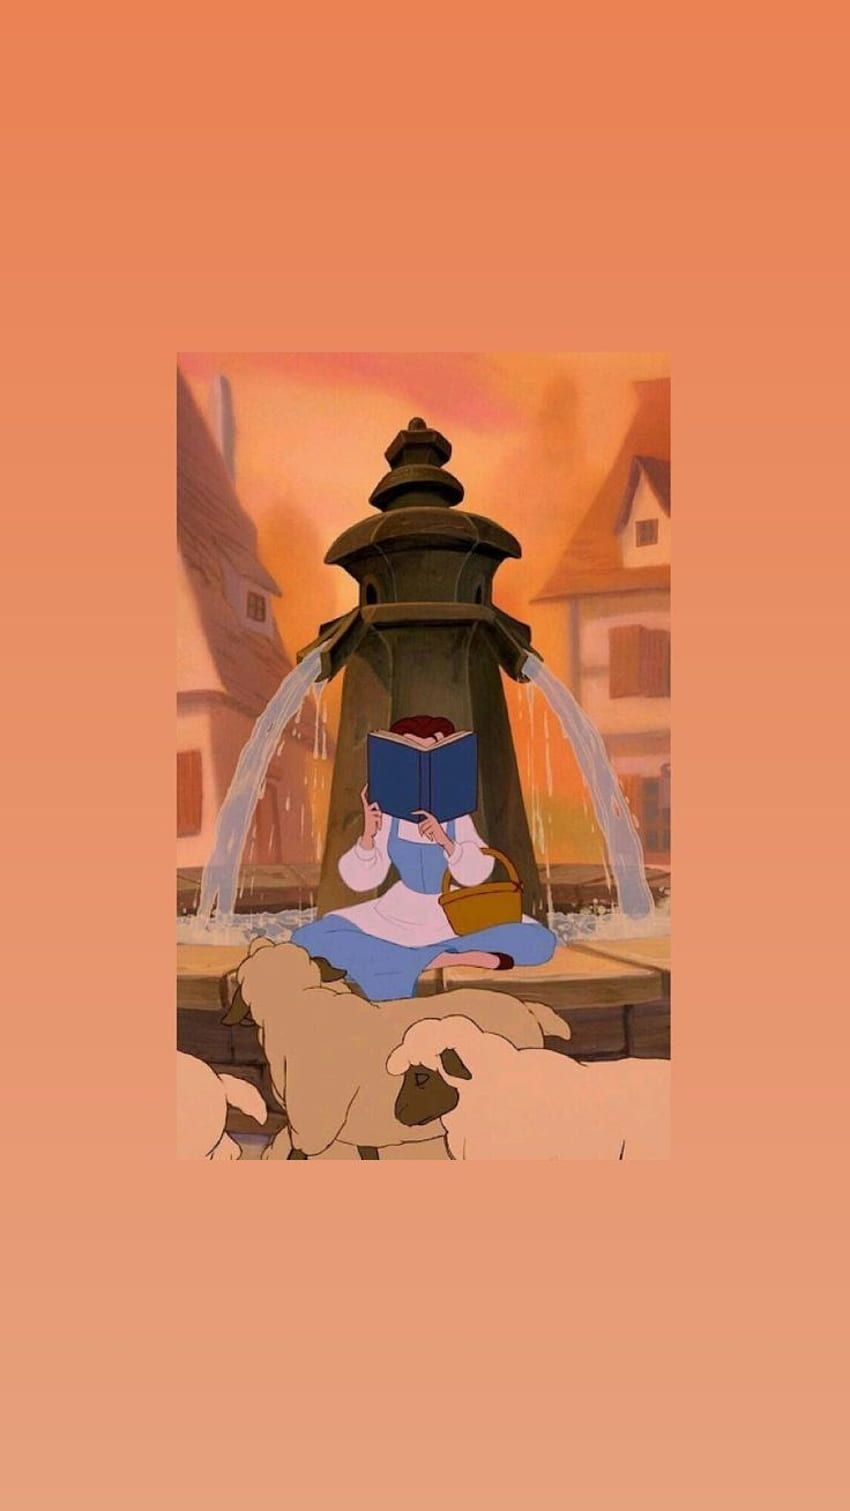 Aesthetic Disney wallpaper for phone with Belle reading a book in front of a fountain - Belle